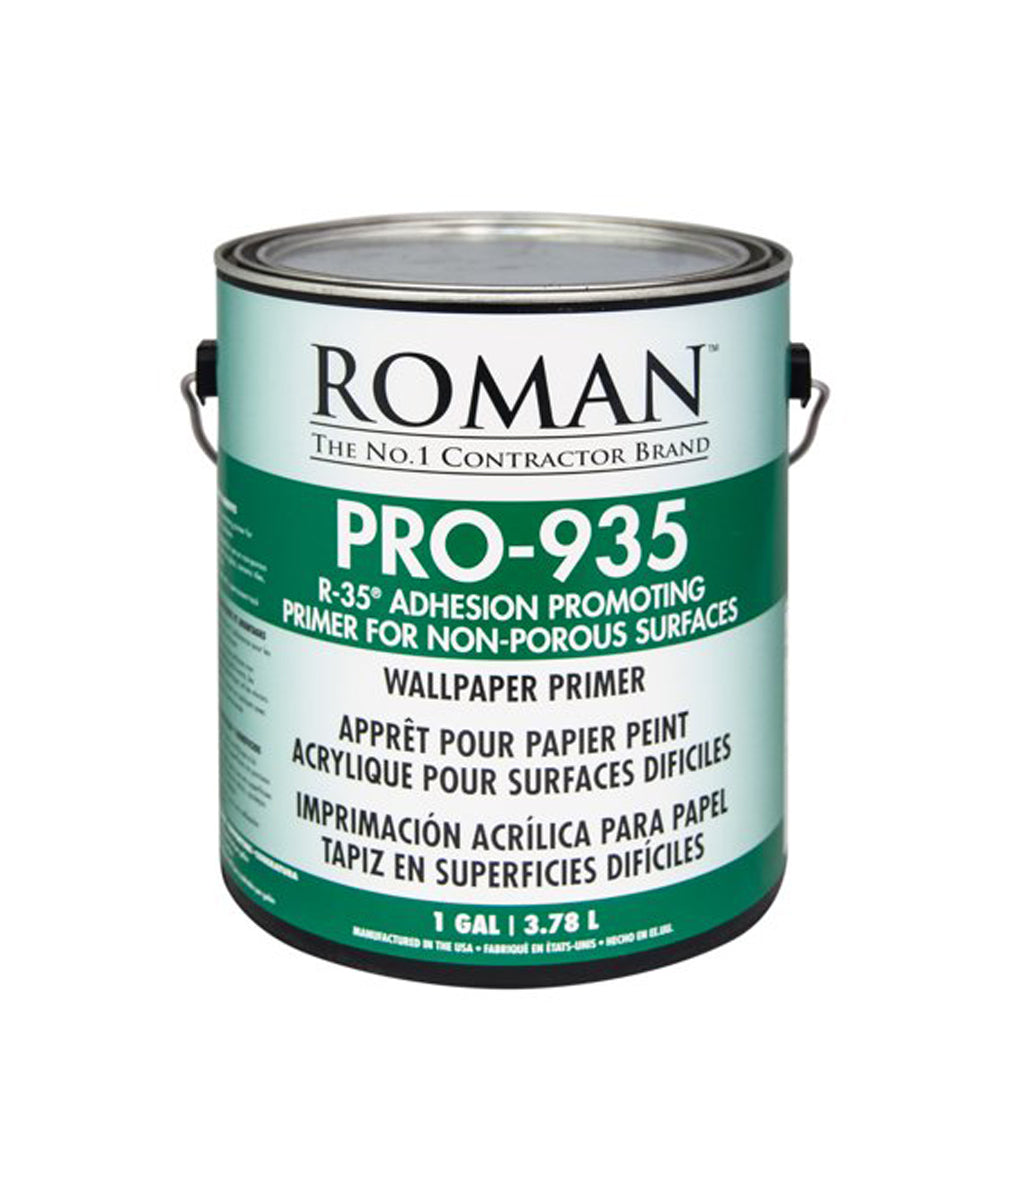 Pro 935 Wallpaper Primer, available at Wallauer's in NY.